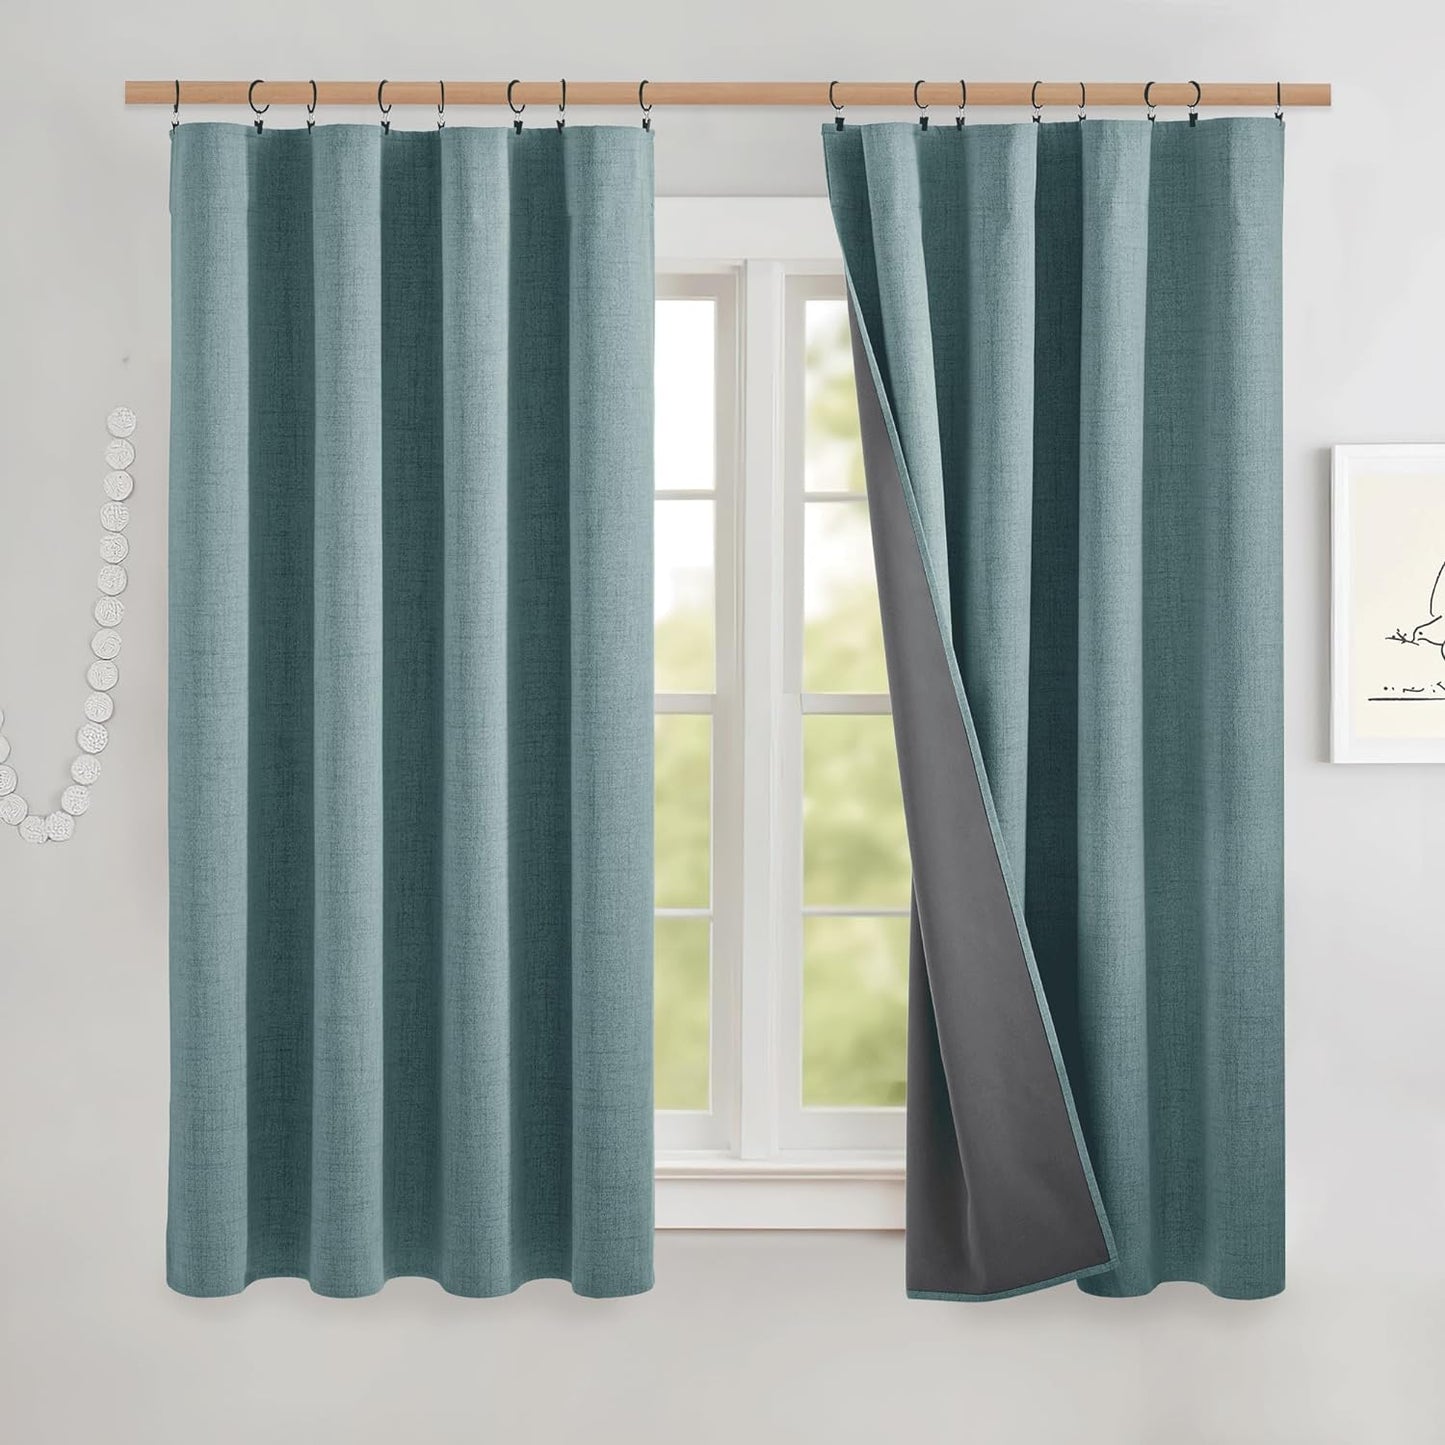 NICETOWN 100% Blackout Linen Curtains for Living Room with Thermal Insulated White Liner, Ivory, 52" Wide, 2 Panels, 84" Long Drapes, Back Tab Retro Linen Curtains Vertical Drapes Privacy for Bedroom  NICETOWN Skylark Blue W52 X L48 